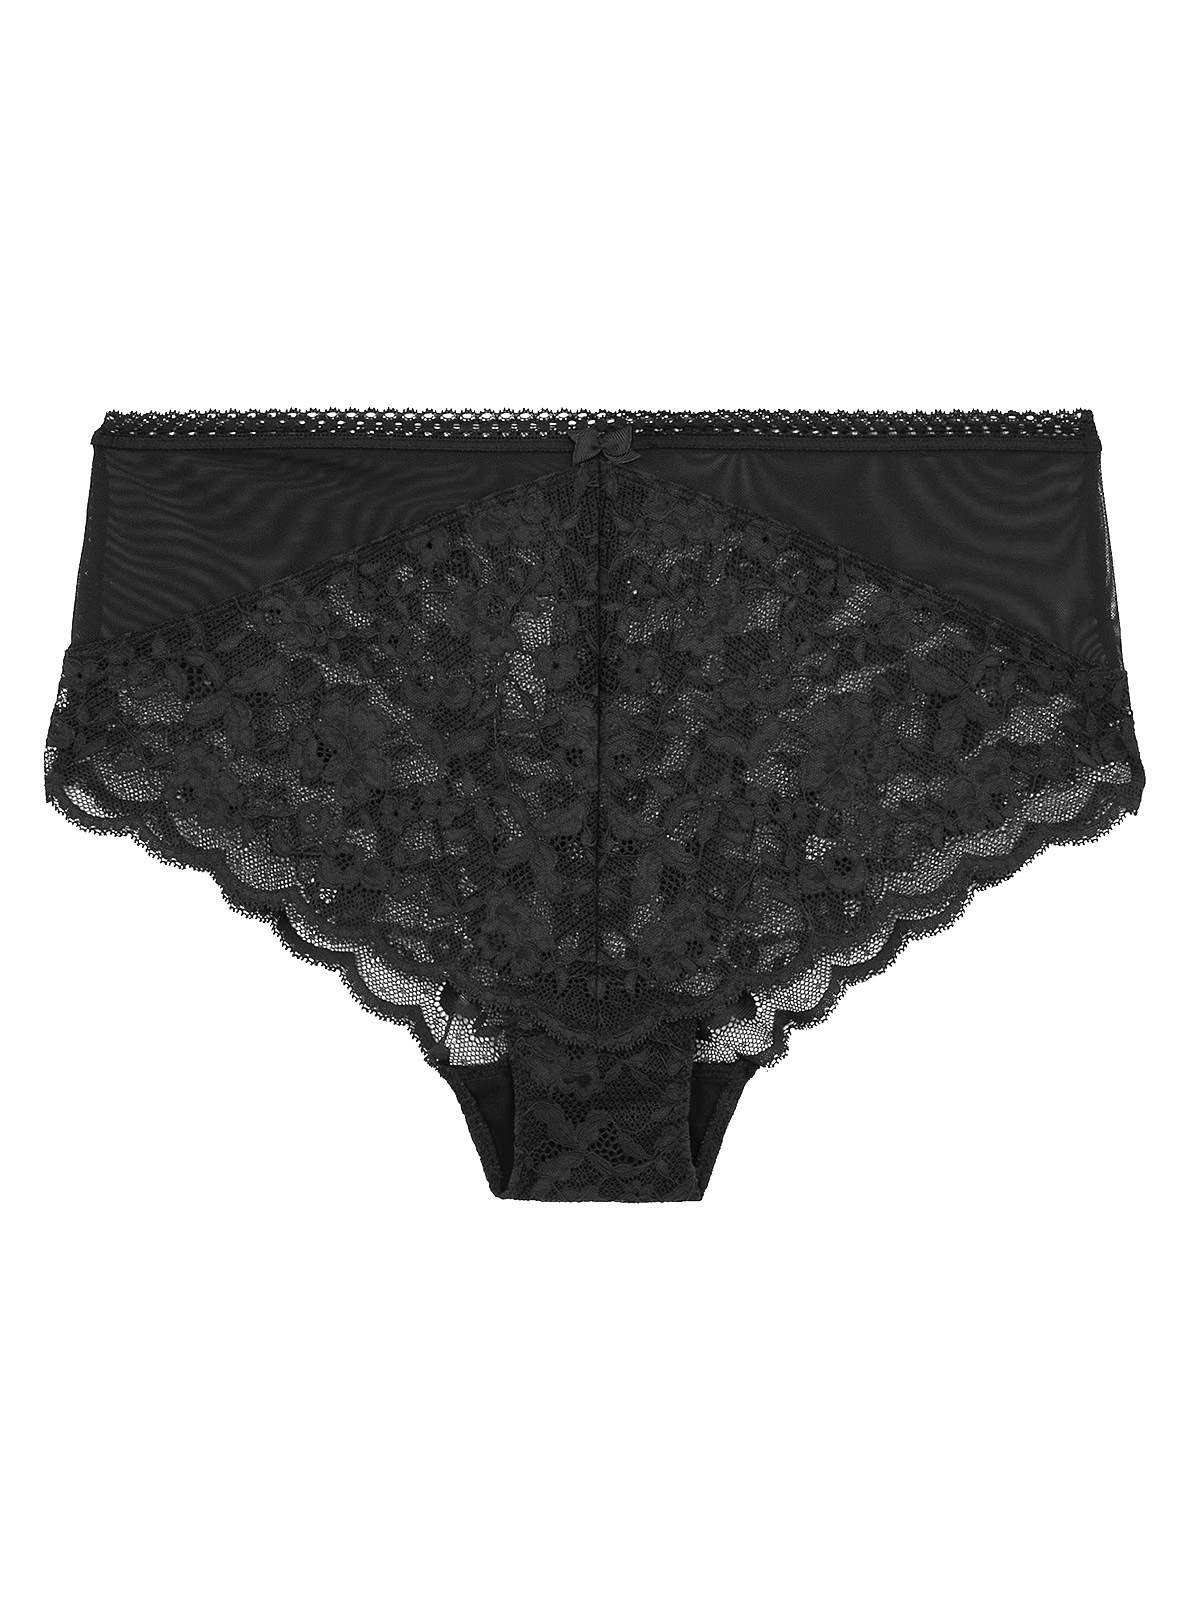 Marks and Spencer - - M&5 BLACK Floral Lace High Waisted Brazilian ...